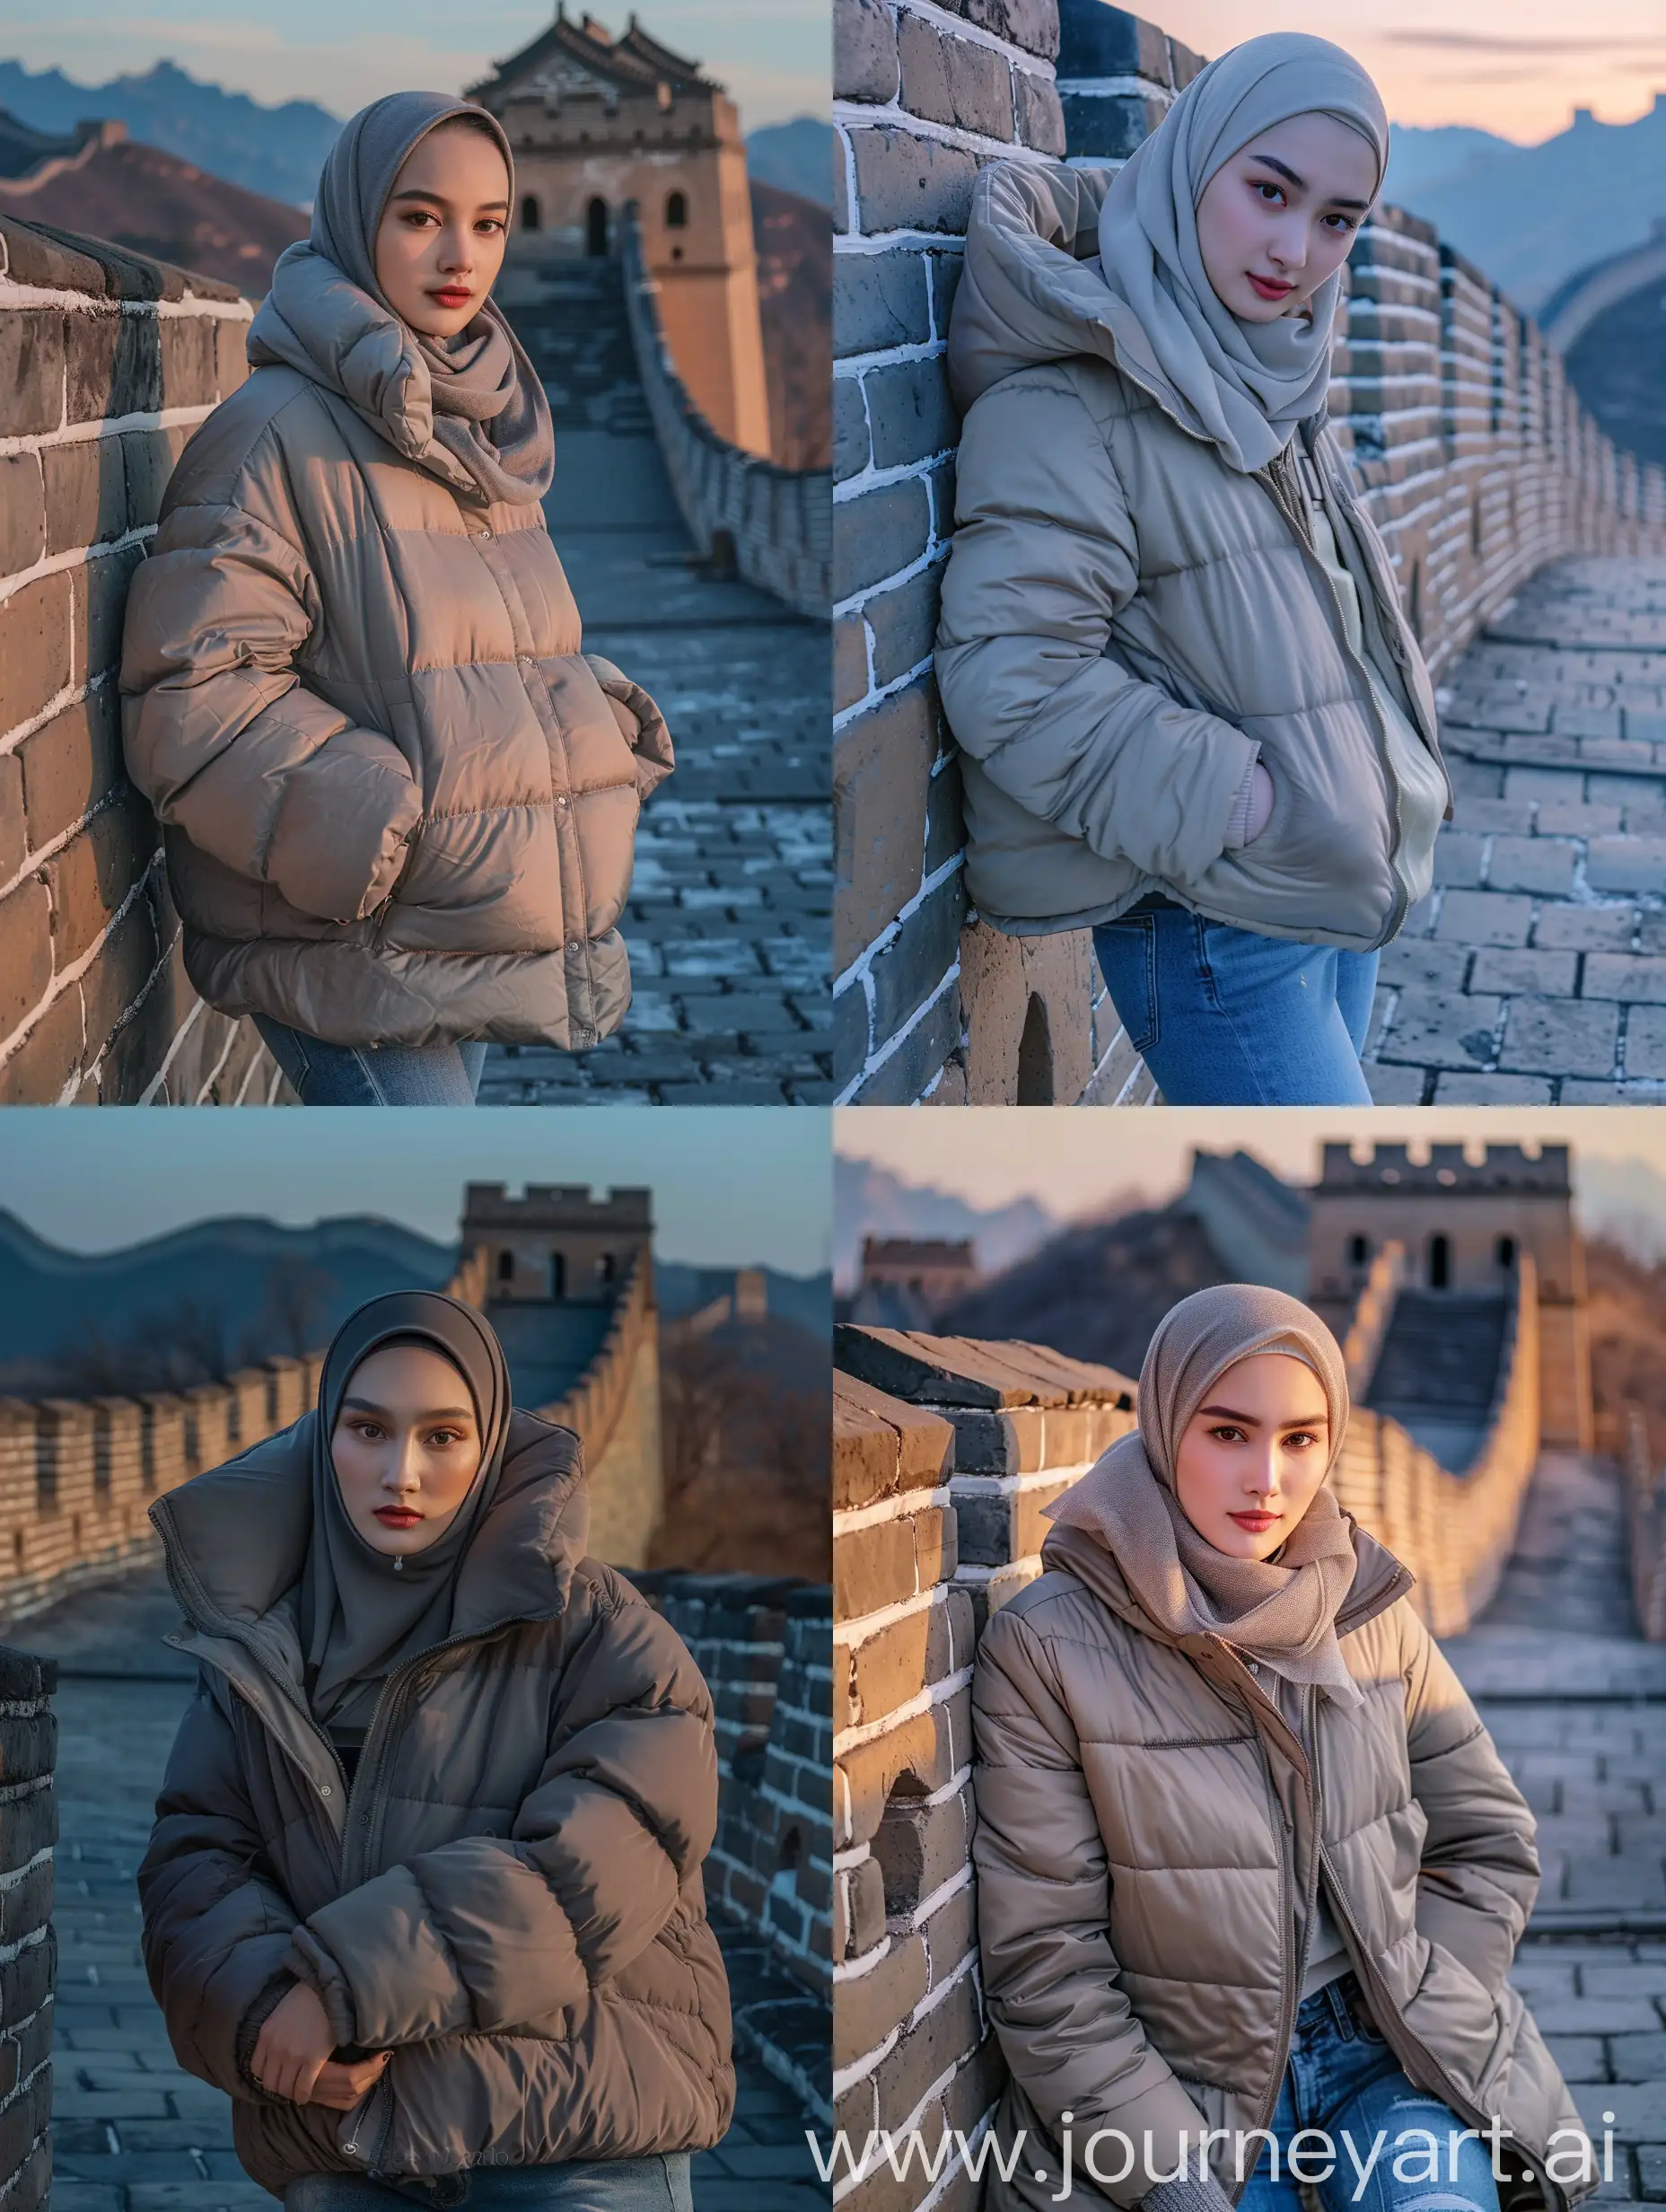 Elegant-Indonesian-Woman-Poses-at-Great-Wall-of-China-in-Evening-Light